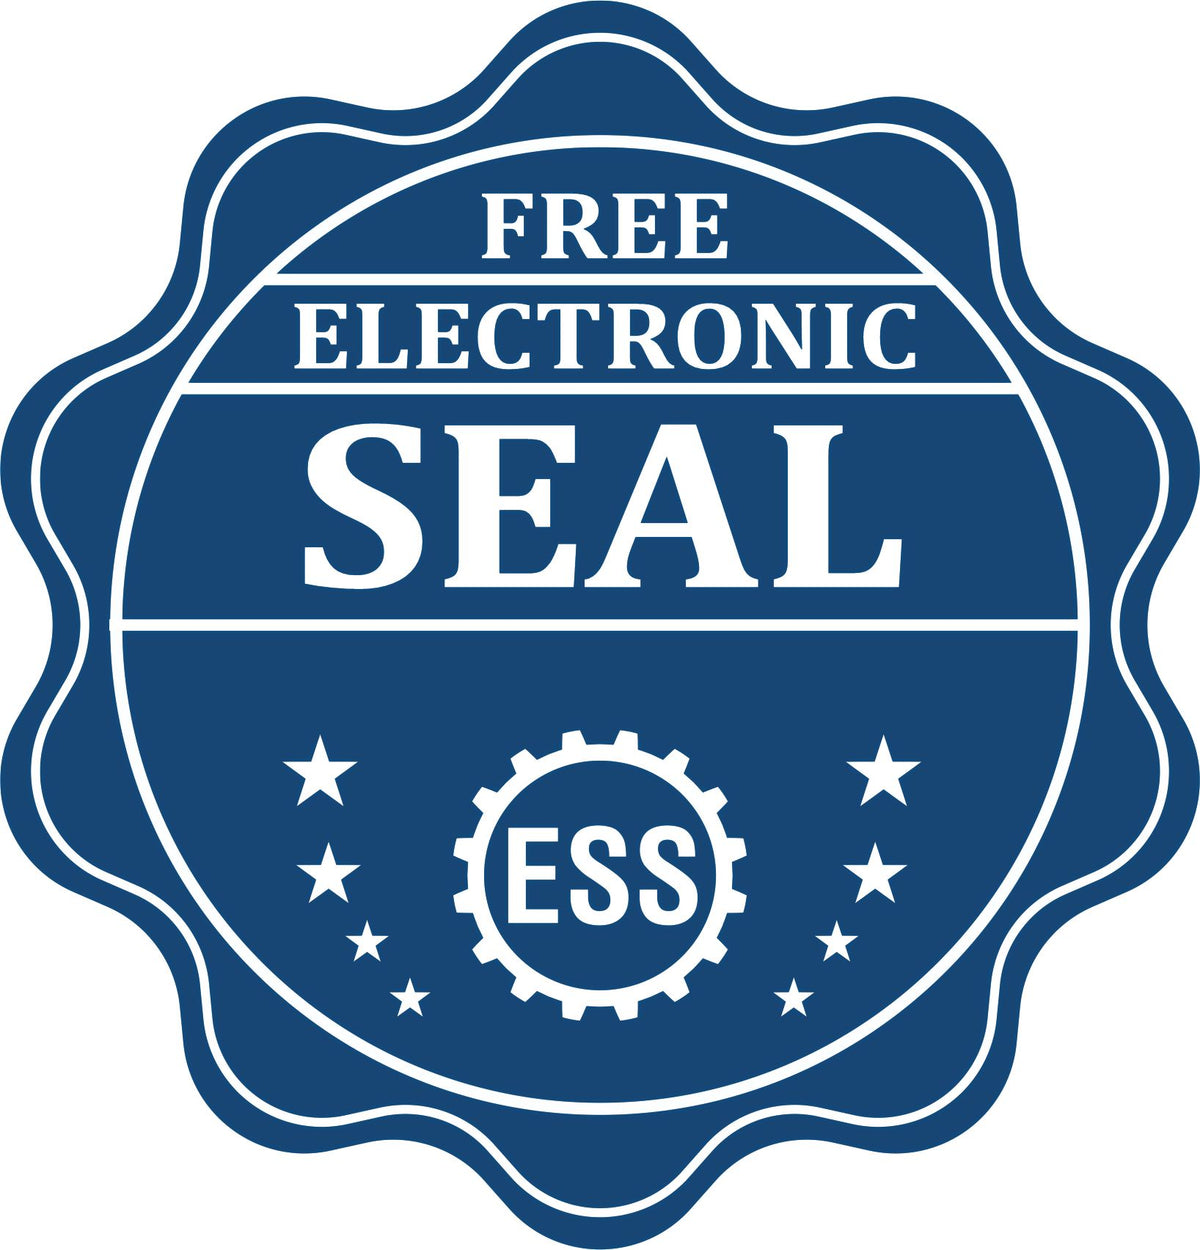 A badge showing a free electronic seal for the PSI Guam Notary Stamp with stars and the ESS gear on the emblem.